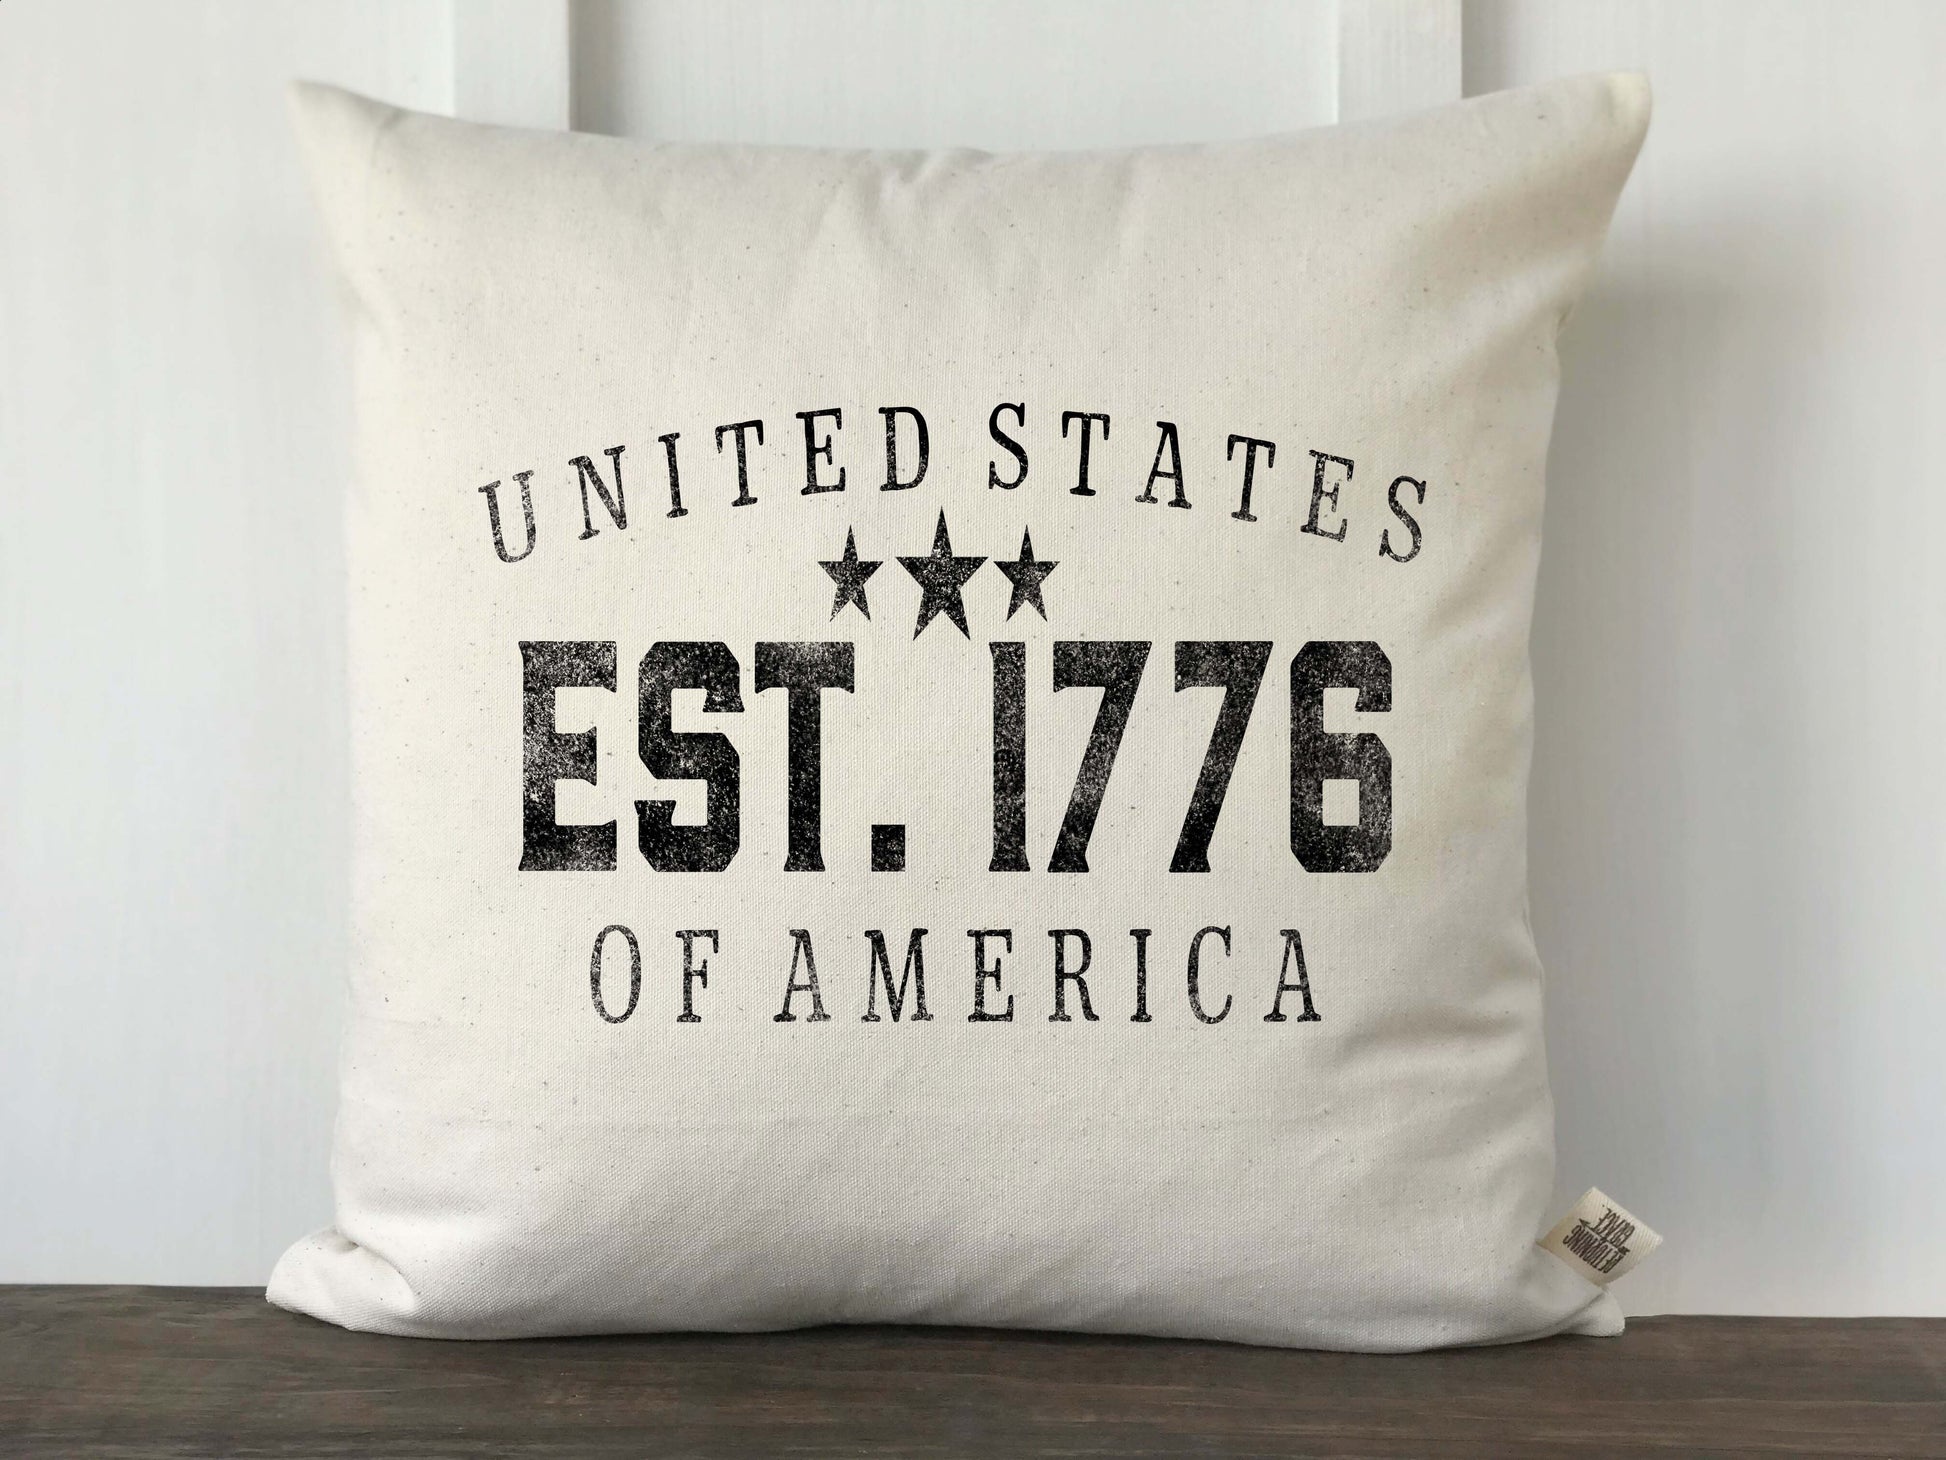 United States of America Est. 1776 Text Distressed Pillow Cover - Returning Grace Designs